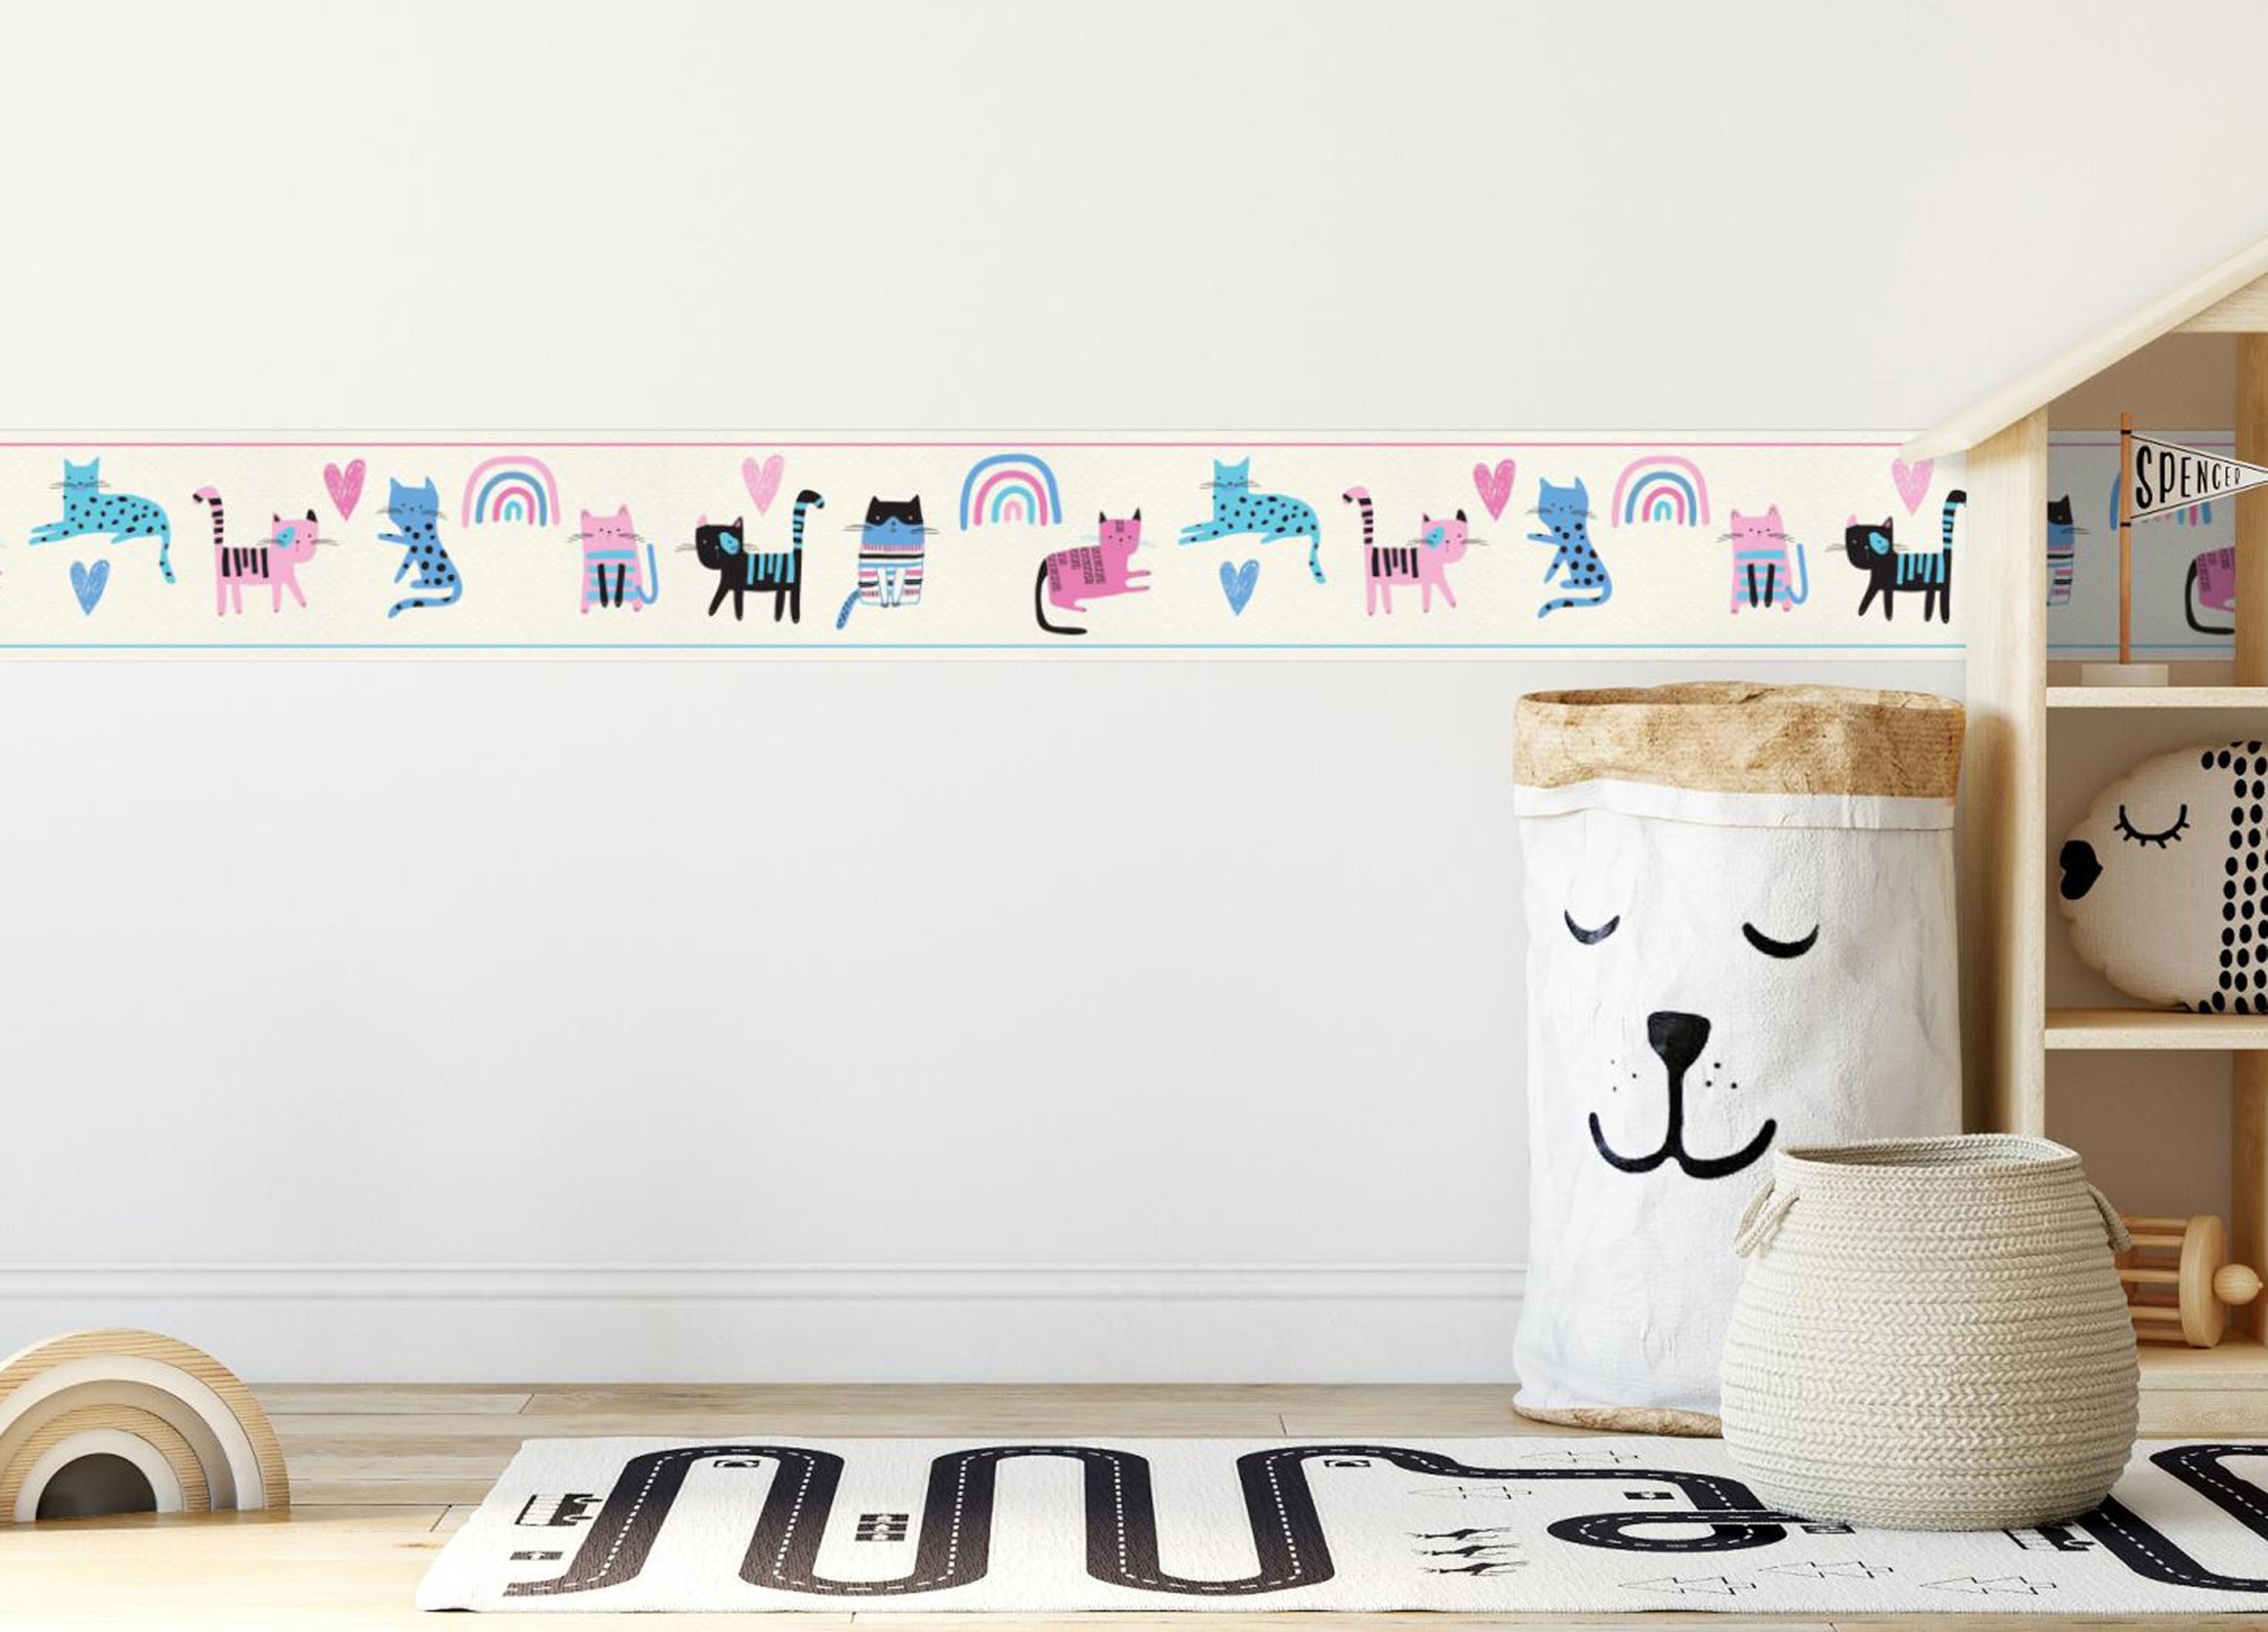 GB90260 Grace & Gardenia Colorful Cats Peel and Stick Wallpaper Border 10in or 8in Height x 15ft Long, Pink Blue Green Cream